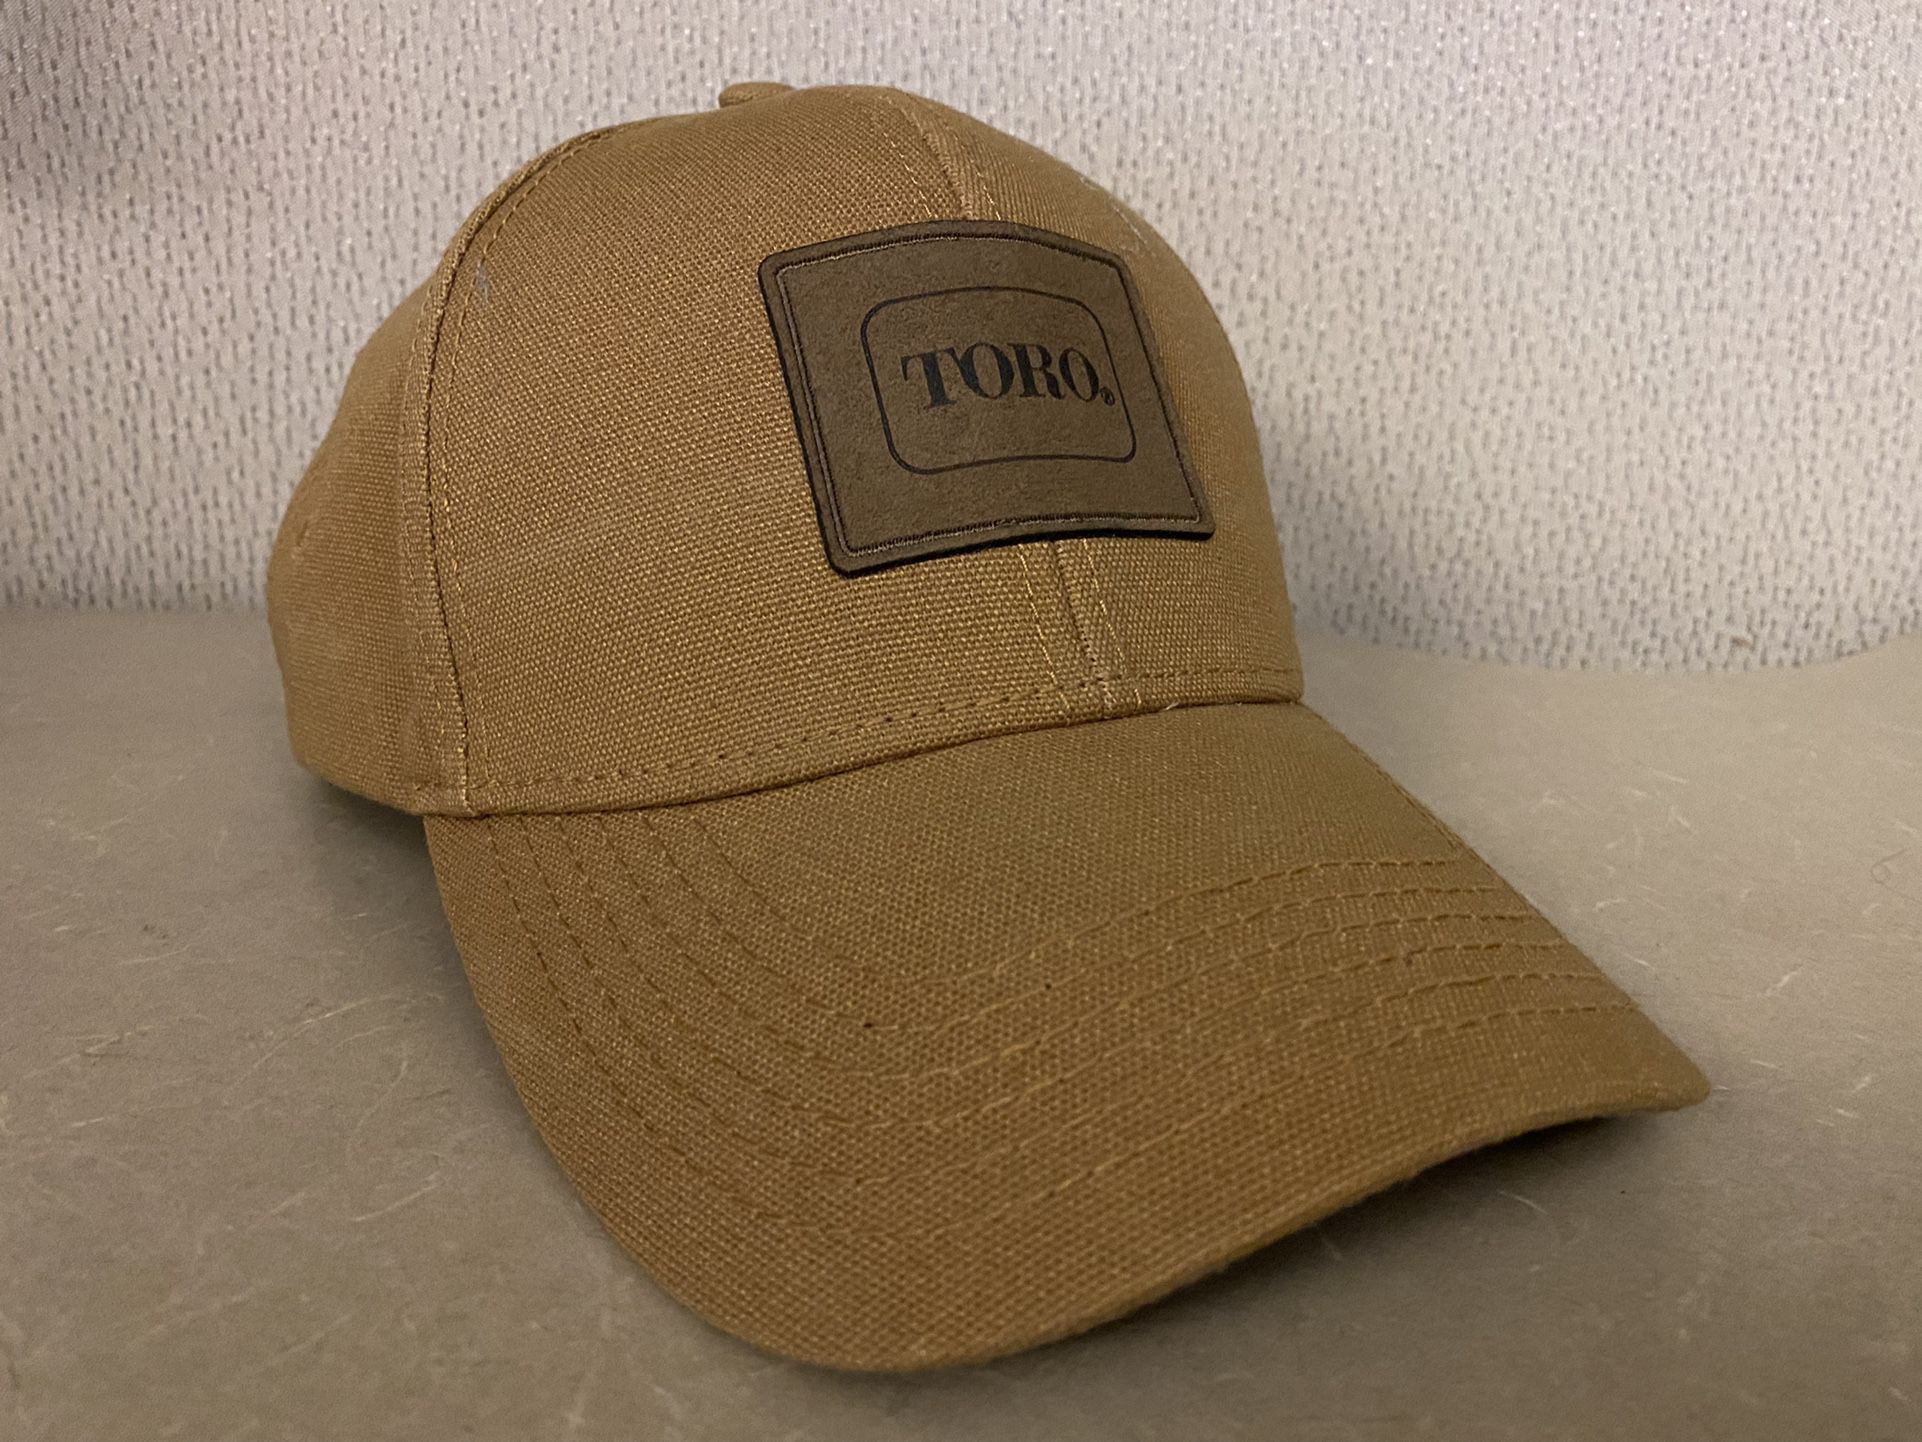 toro Equipment hat landscaping cap brown one size fits all excellent shape can deliver